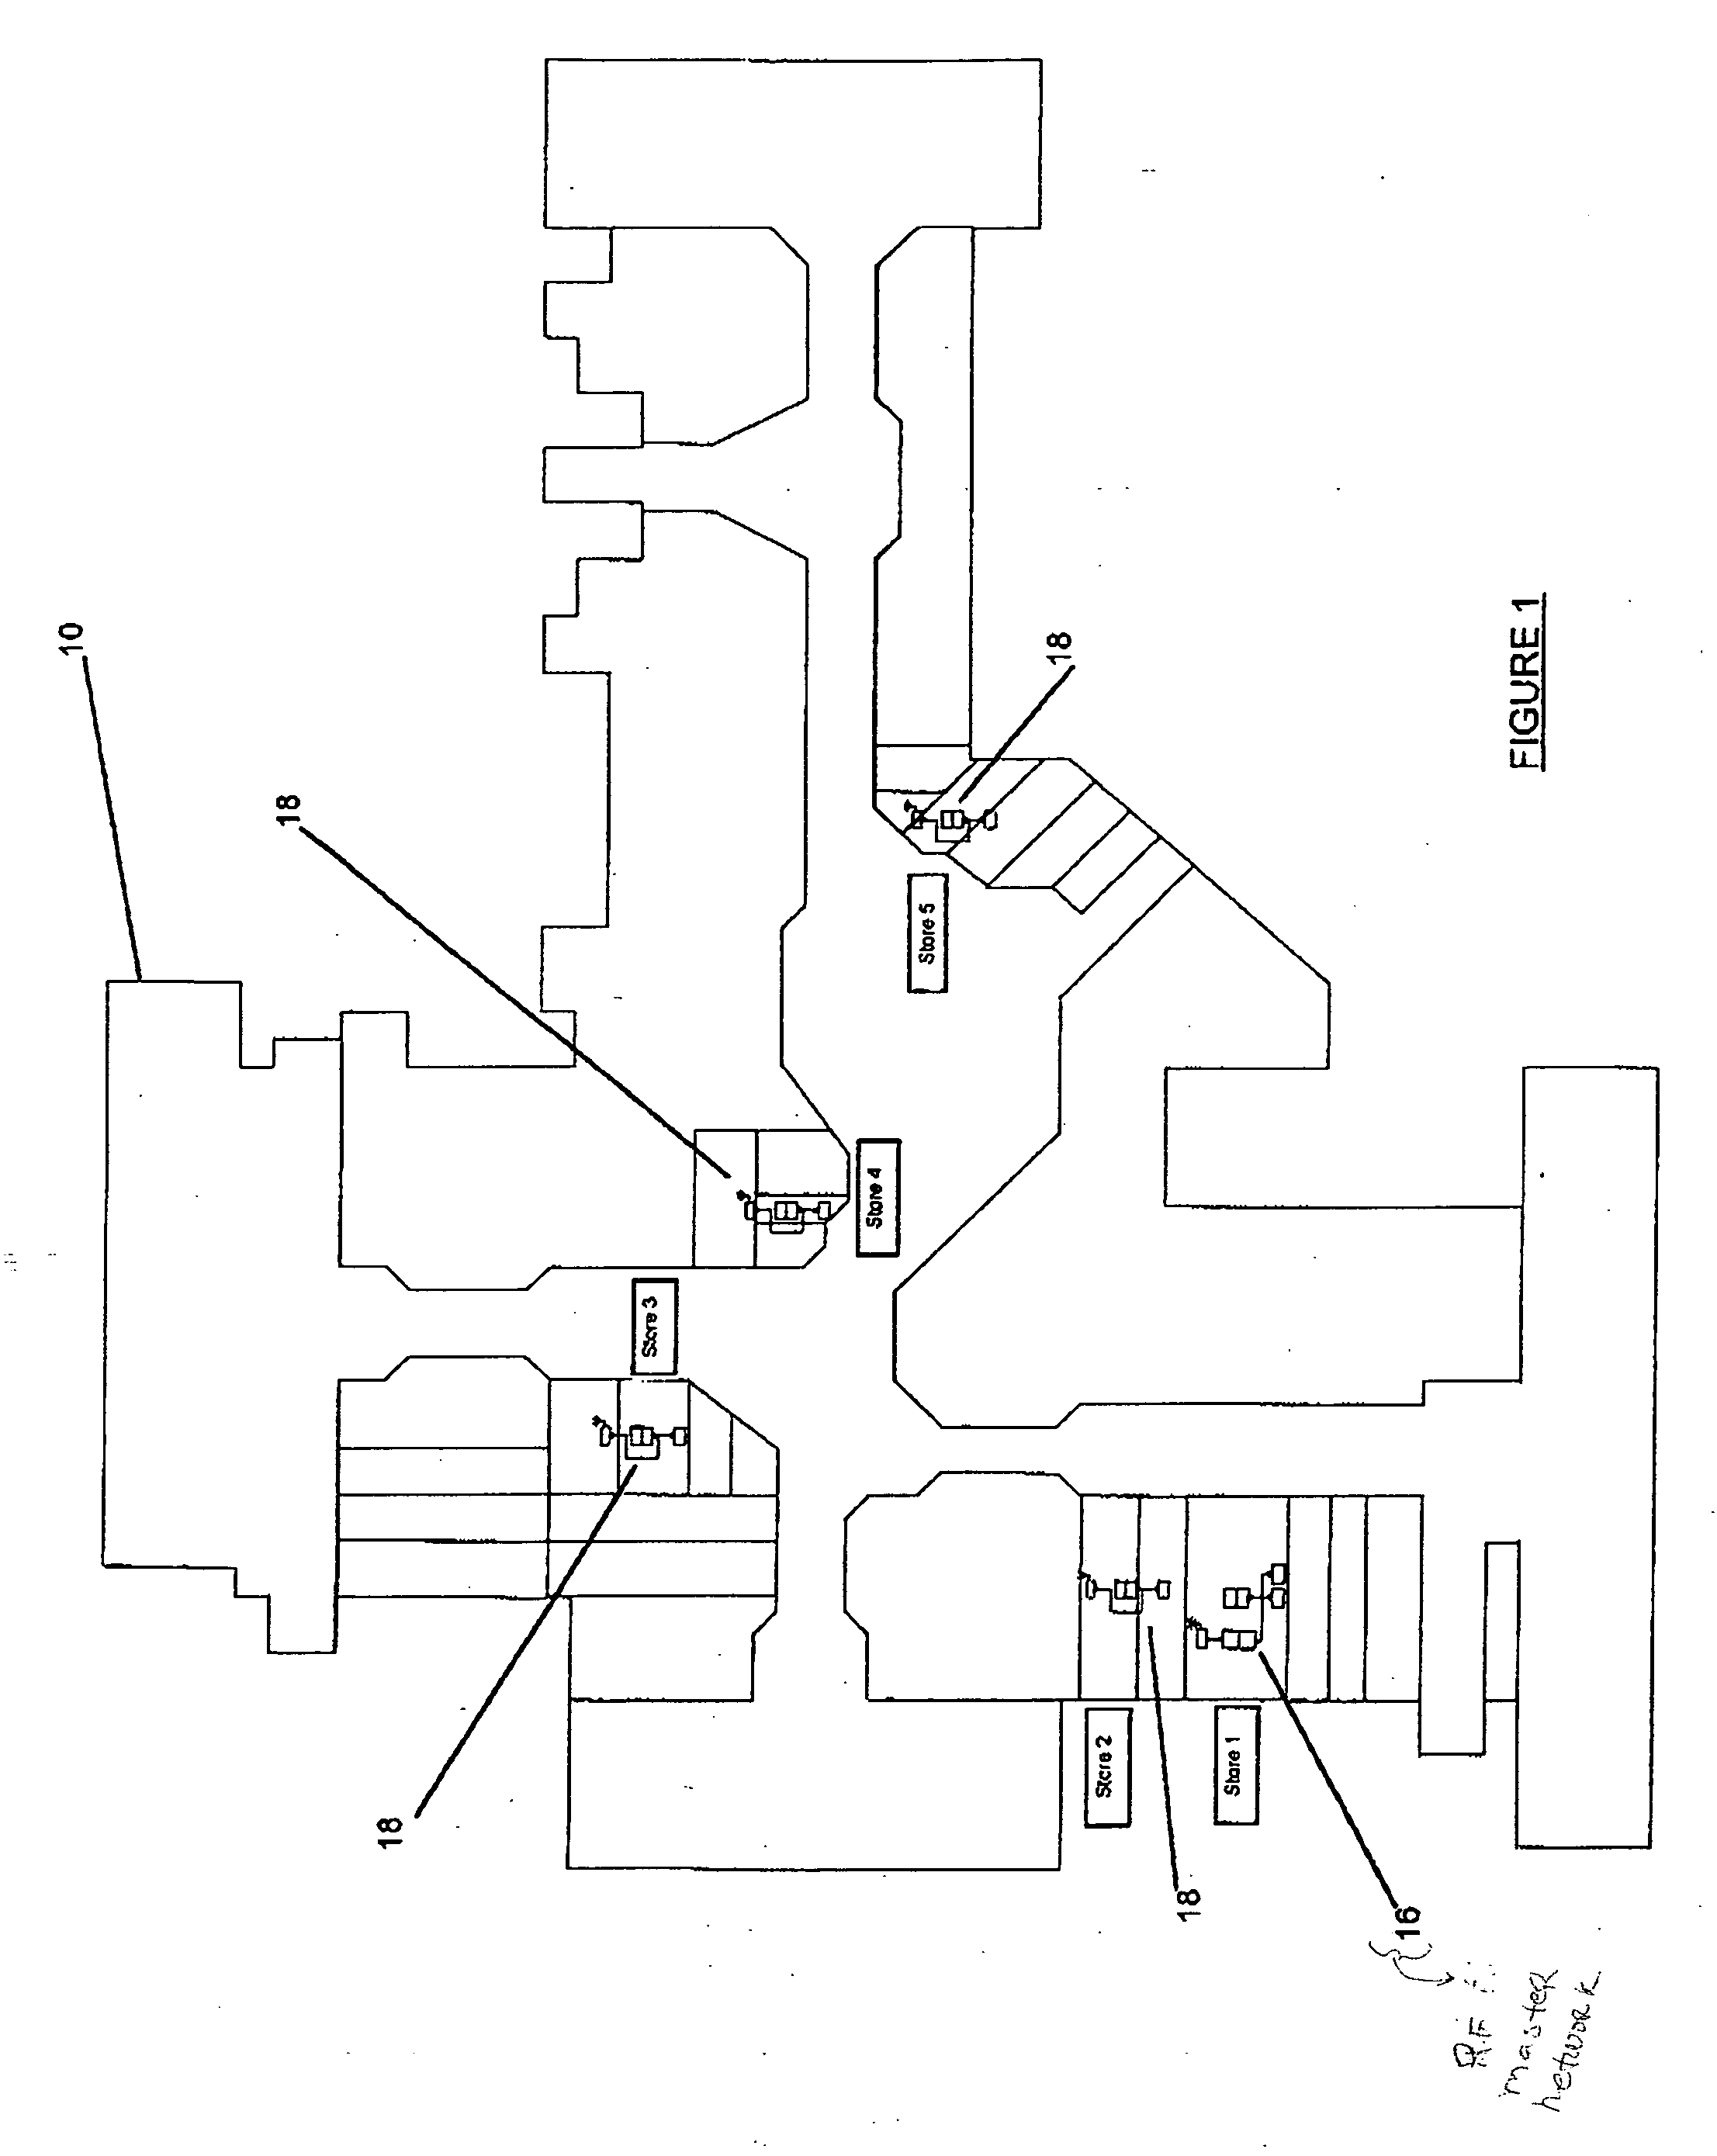 Integrated building control and information system with wireless networking